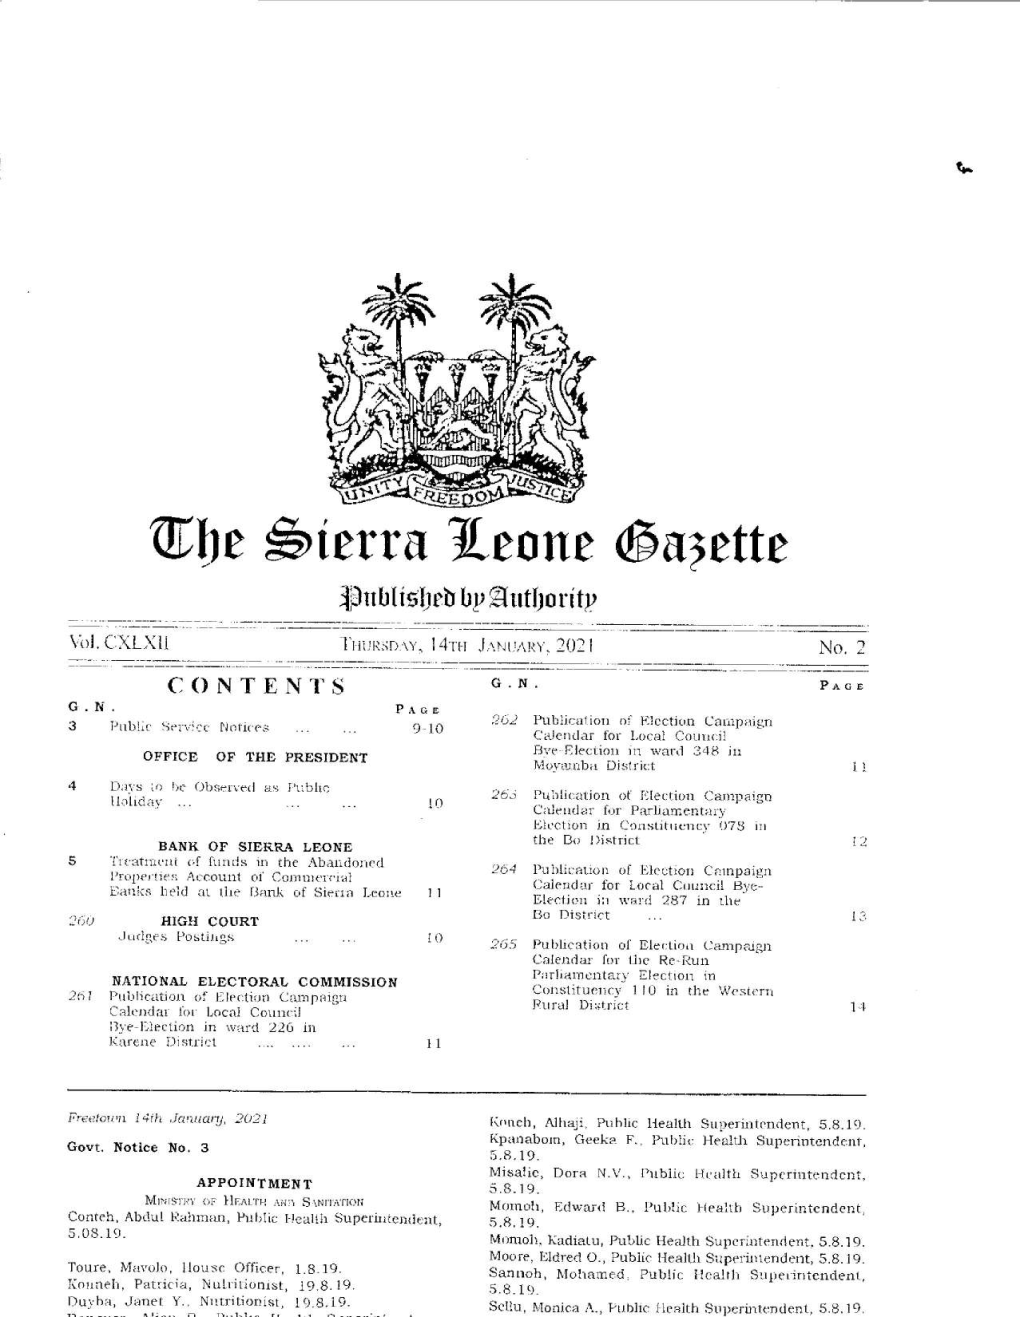 Che Sierra Leone Gasette Published by Authority